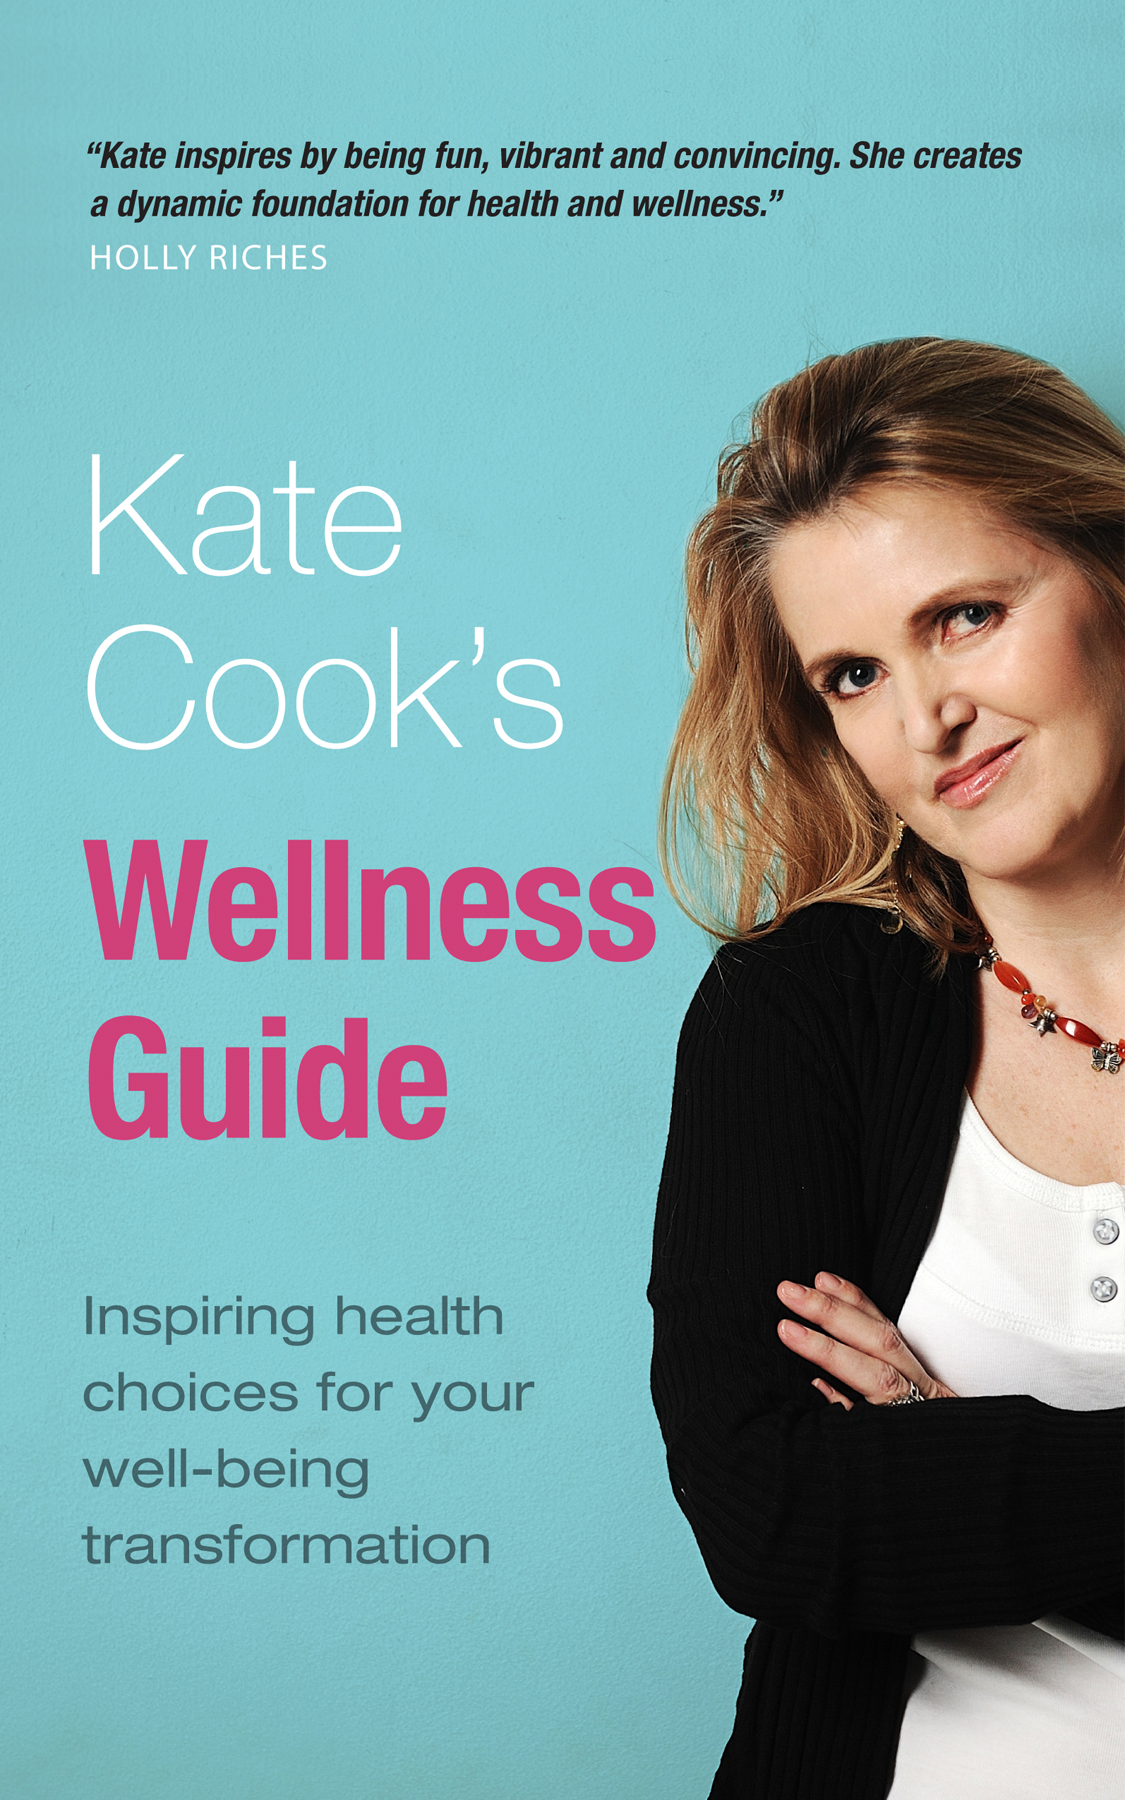 Kate Cook’s Wellness Guide